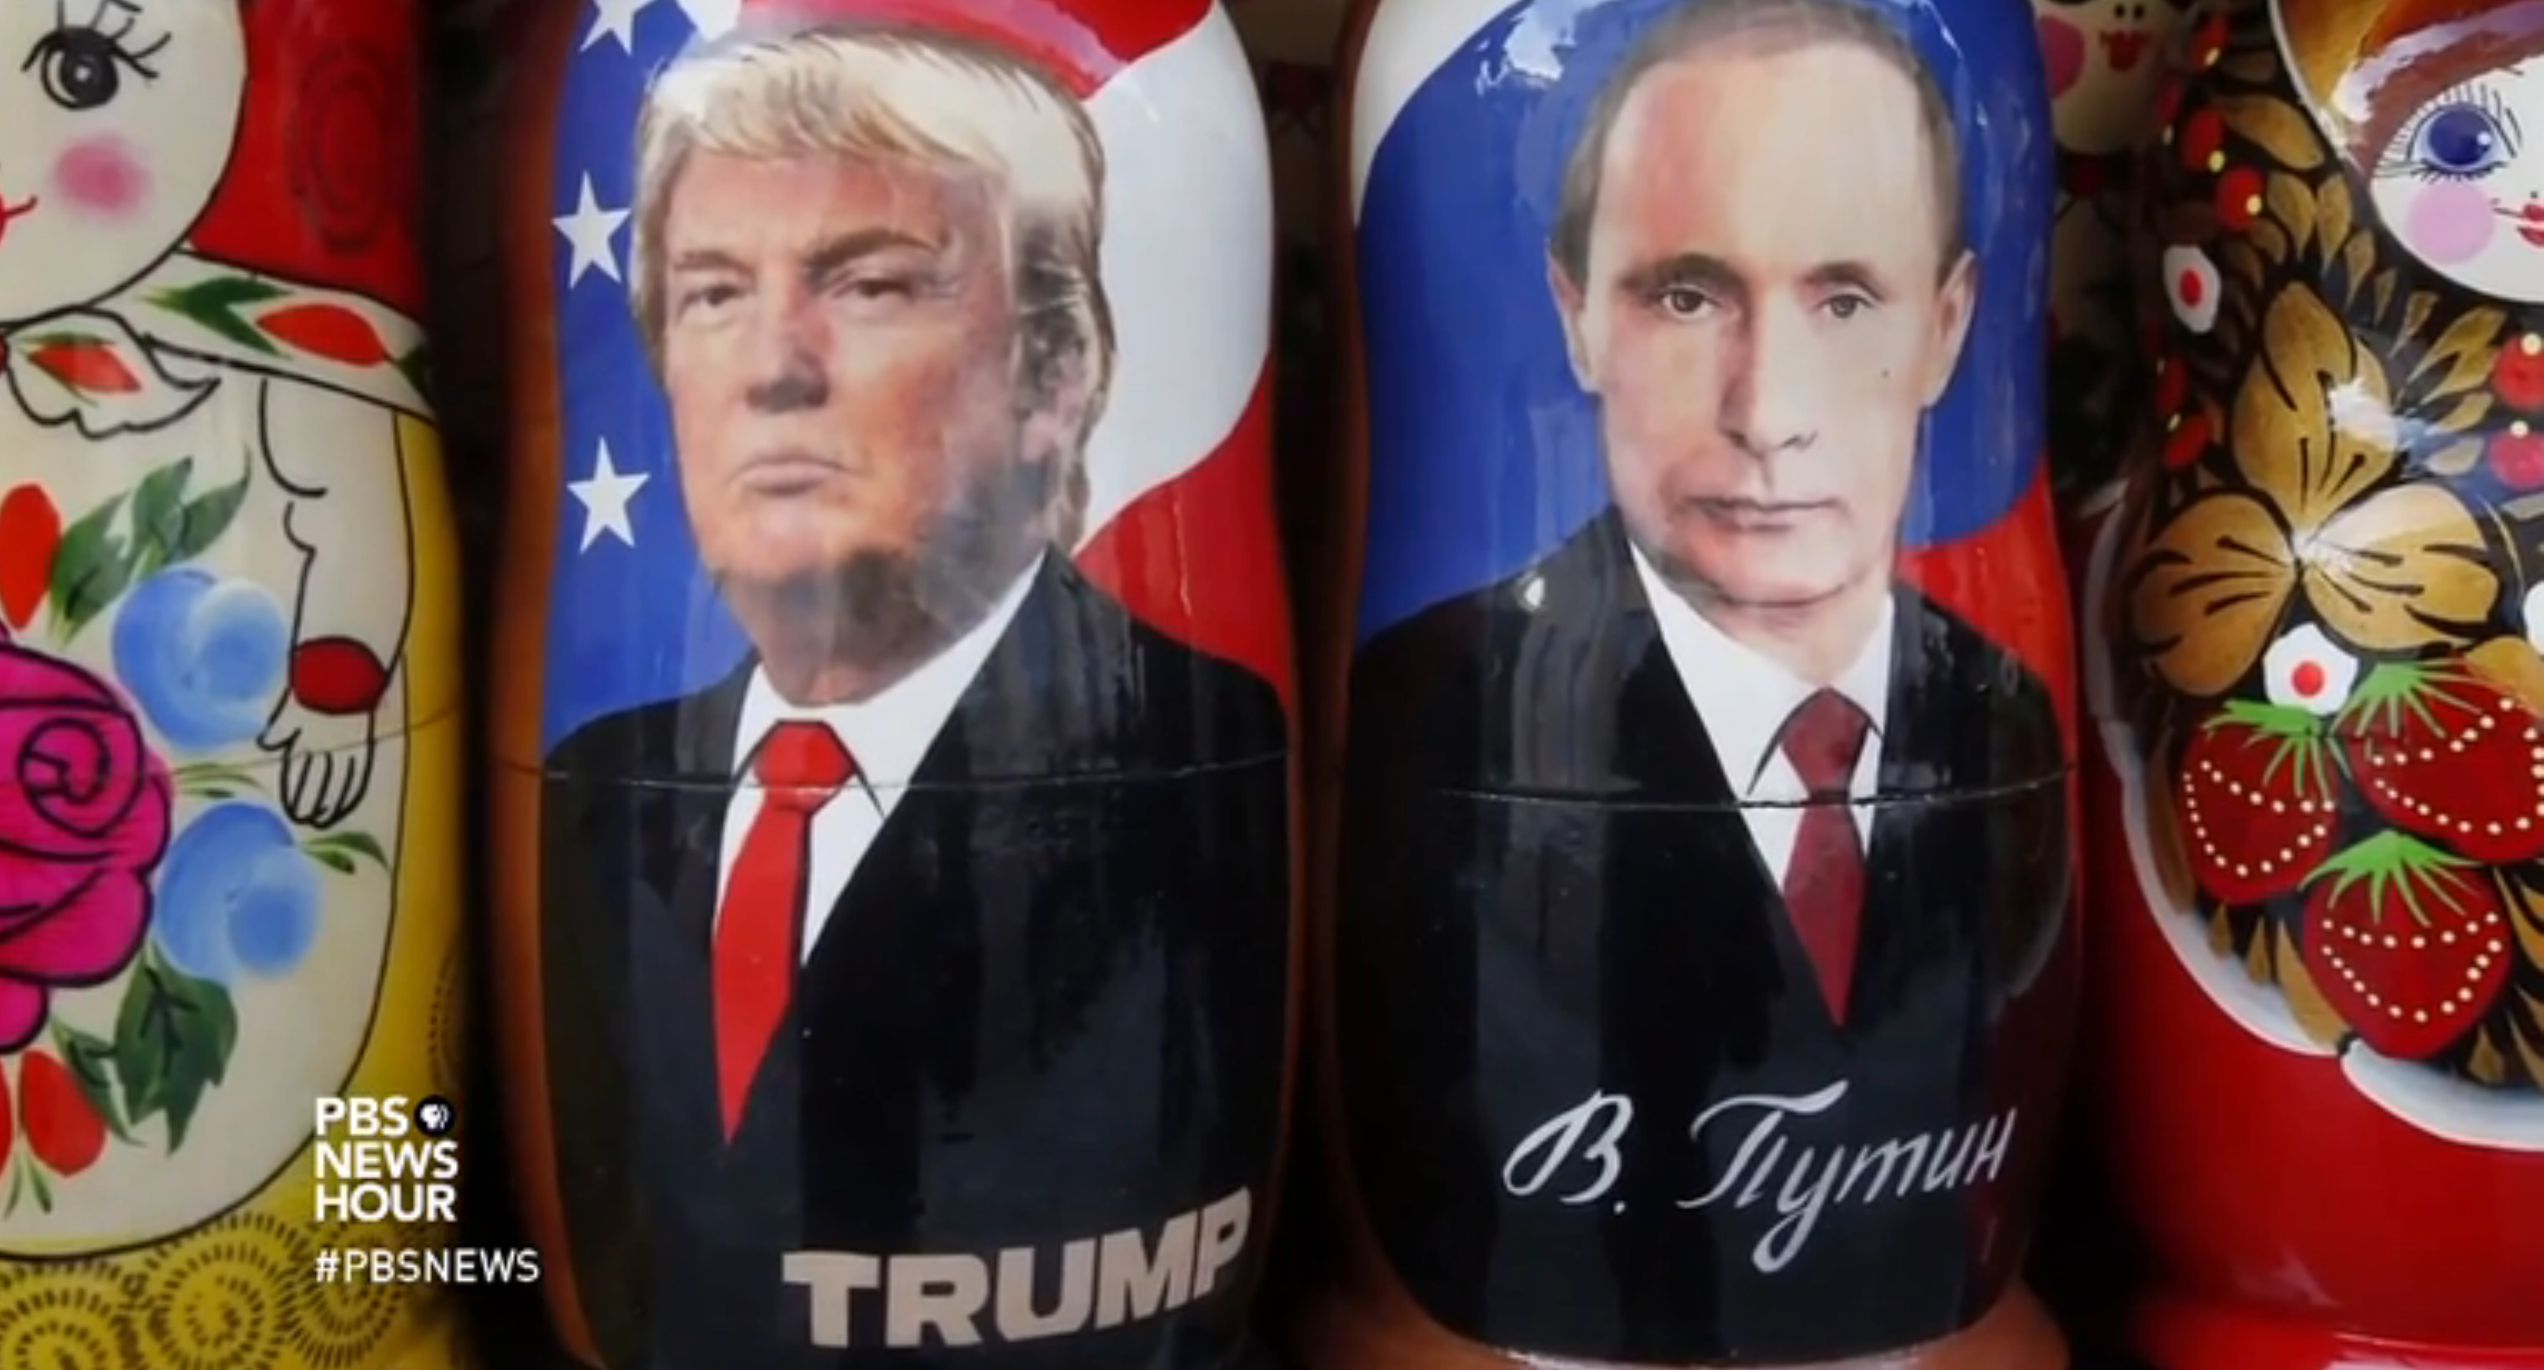 Trump and Putin Russian dolls. Image from PBS Newshour. Russia, 2017. 